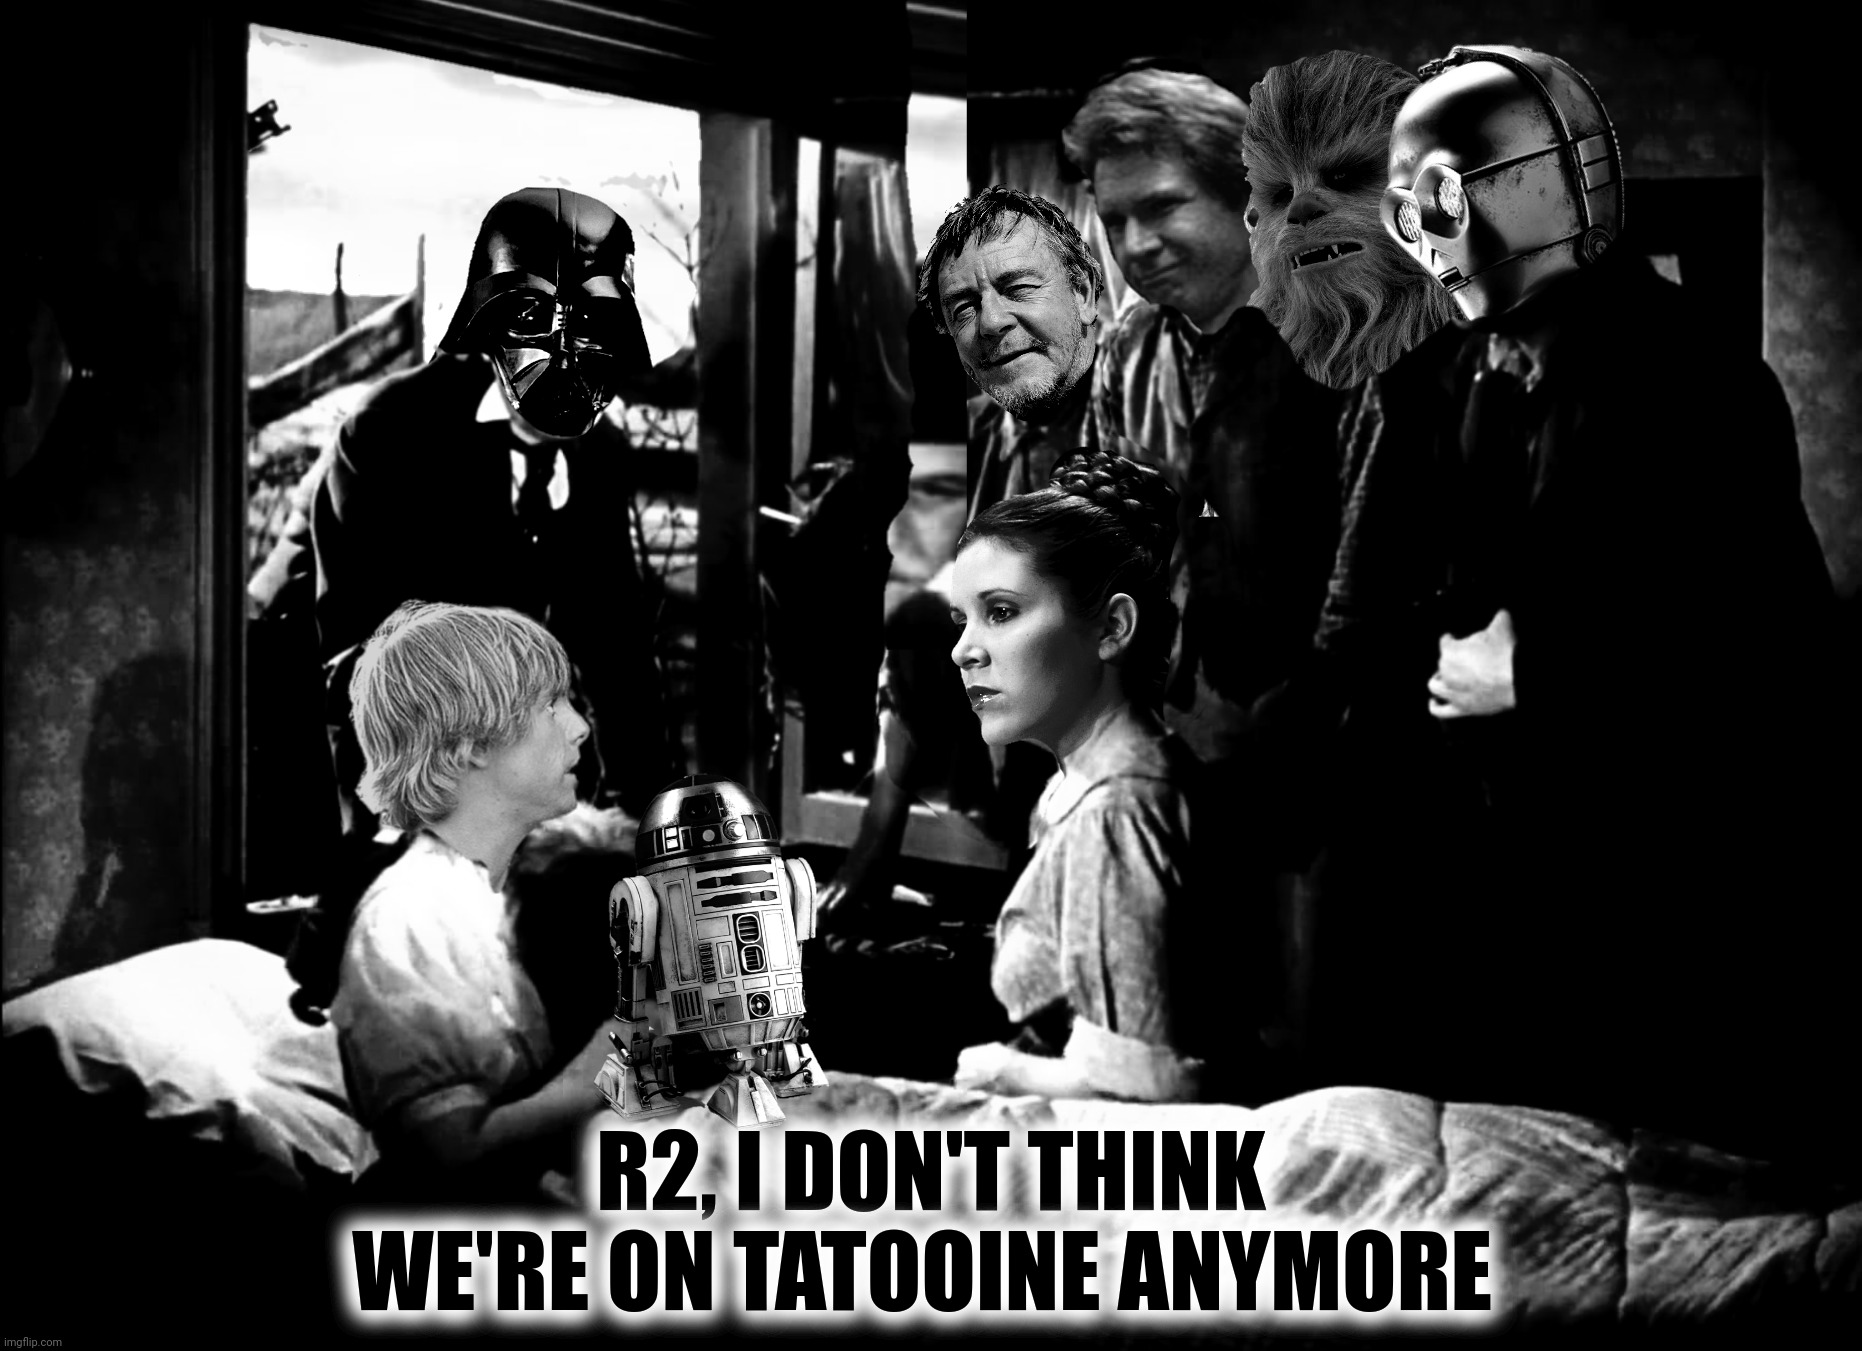 A long time ago over a rainbow far, far away | R2, I DON'T THINK WE'RE ON TATOOINE ANYMORE | image tagged in bad photoshop,the wizard of oz,star wars,luke skywalker,princess leia | made w/ Imgflip meme maker